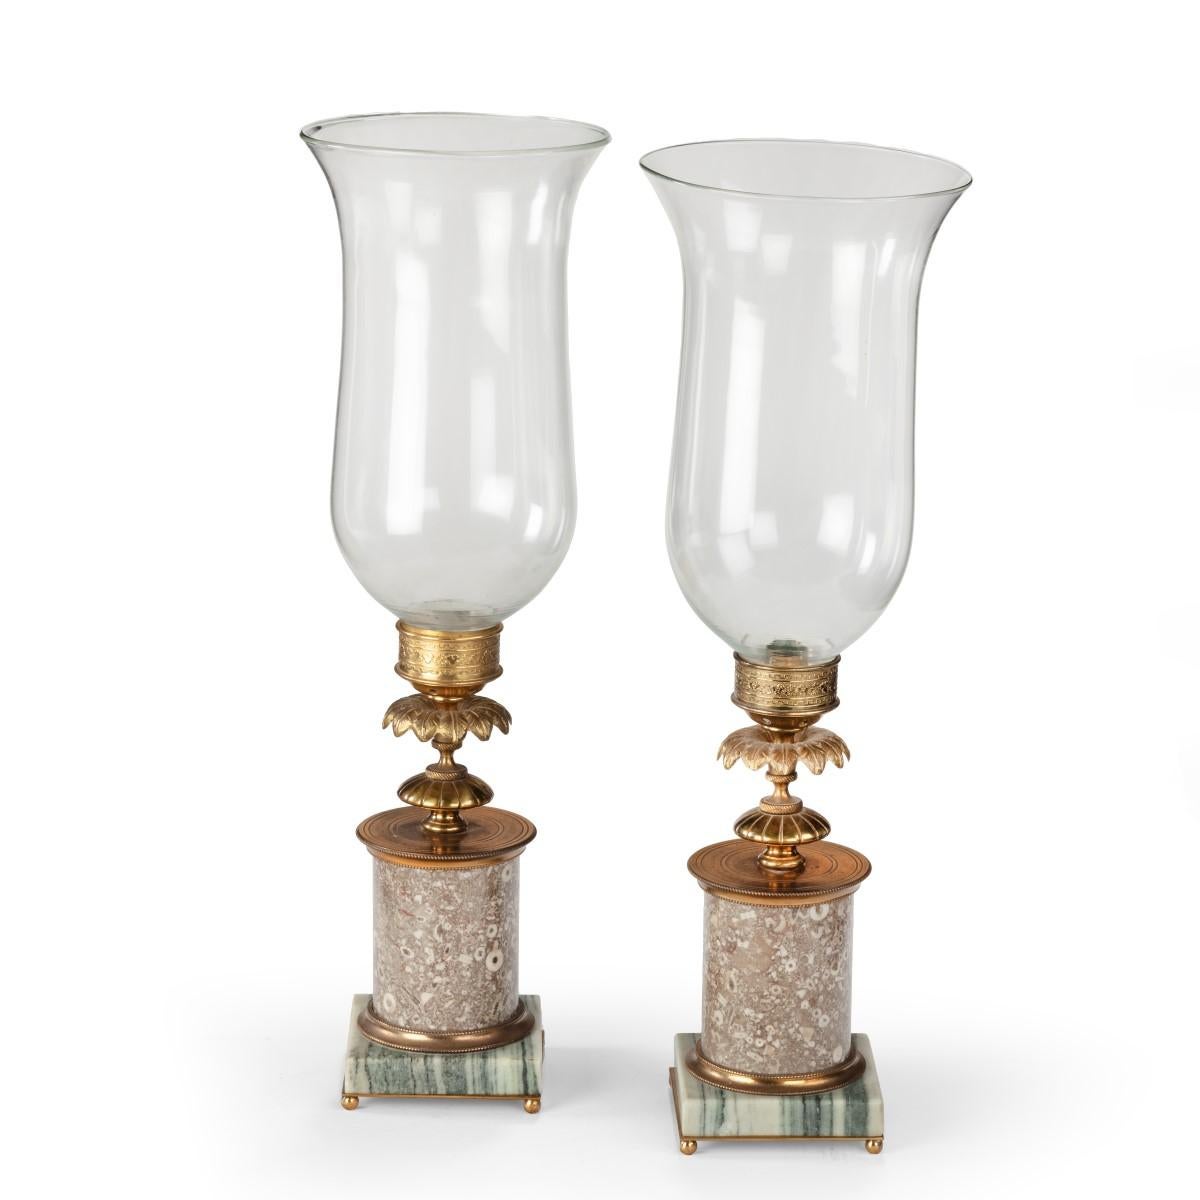 English Pair of Decorative Storm Lamps